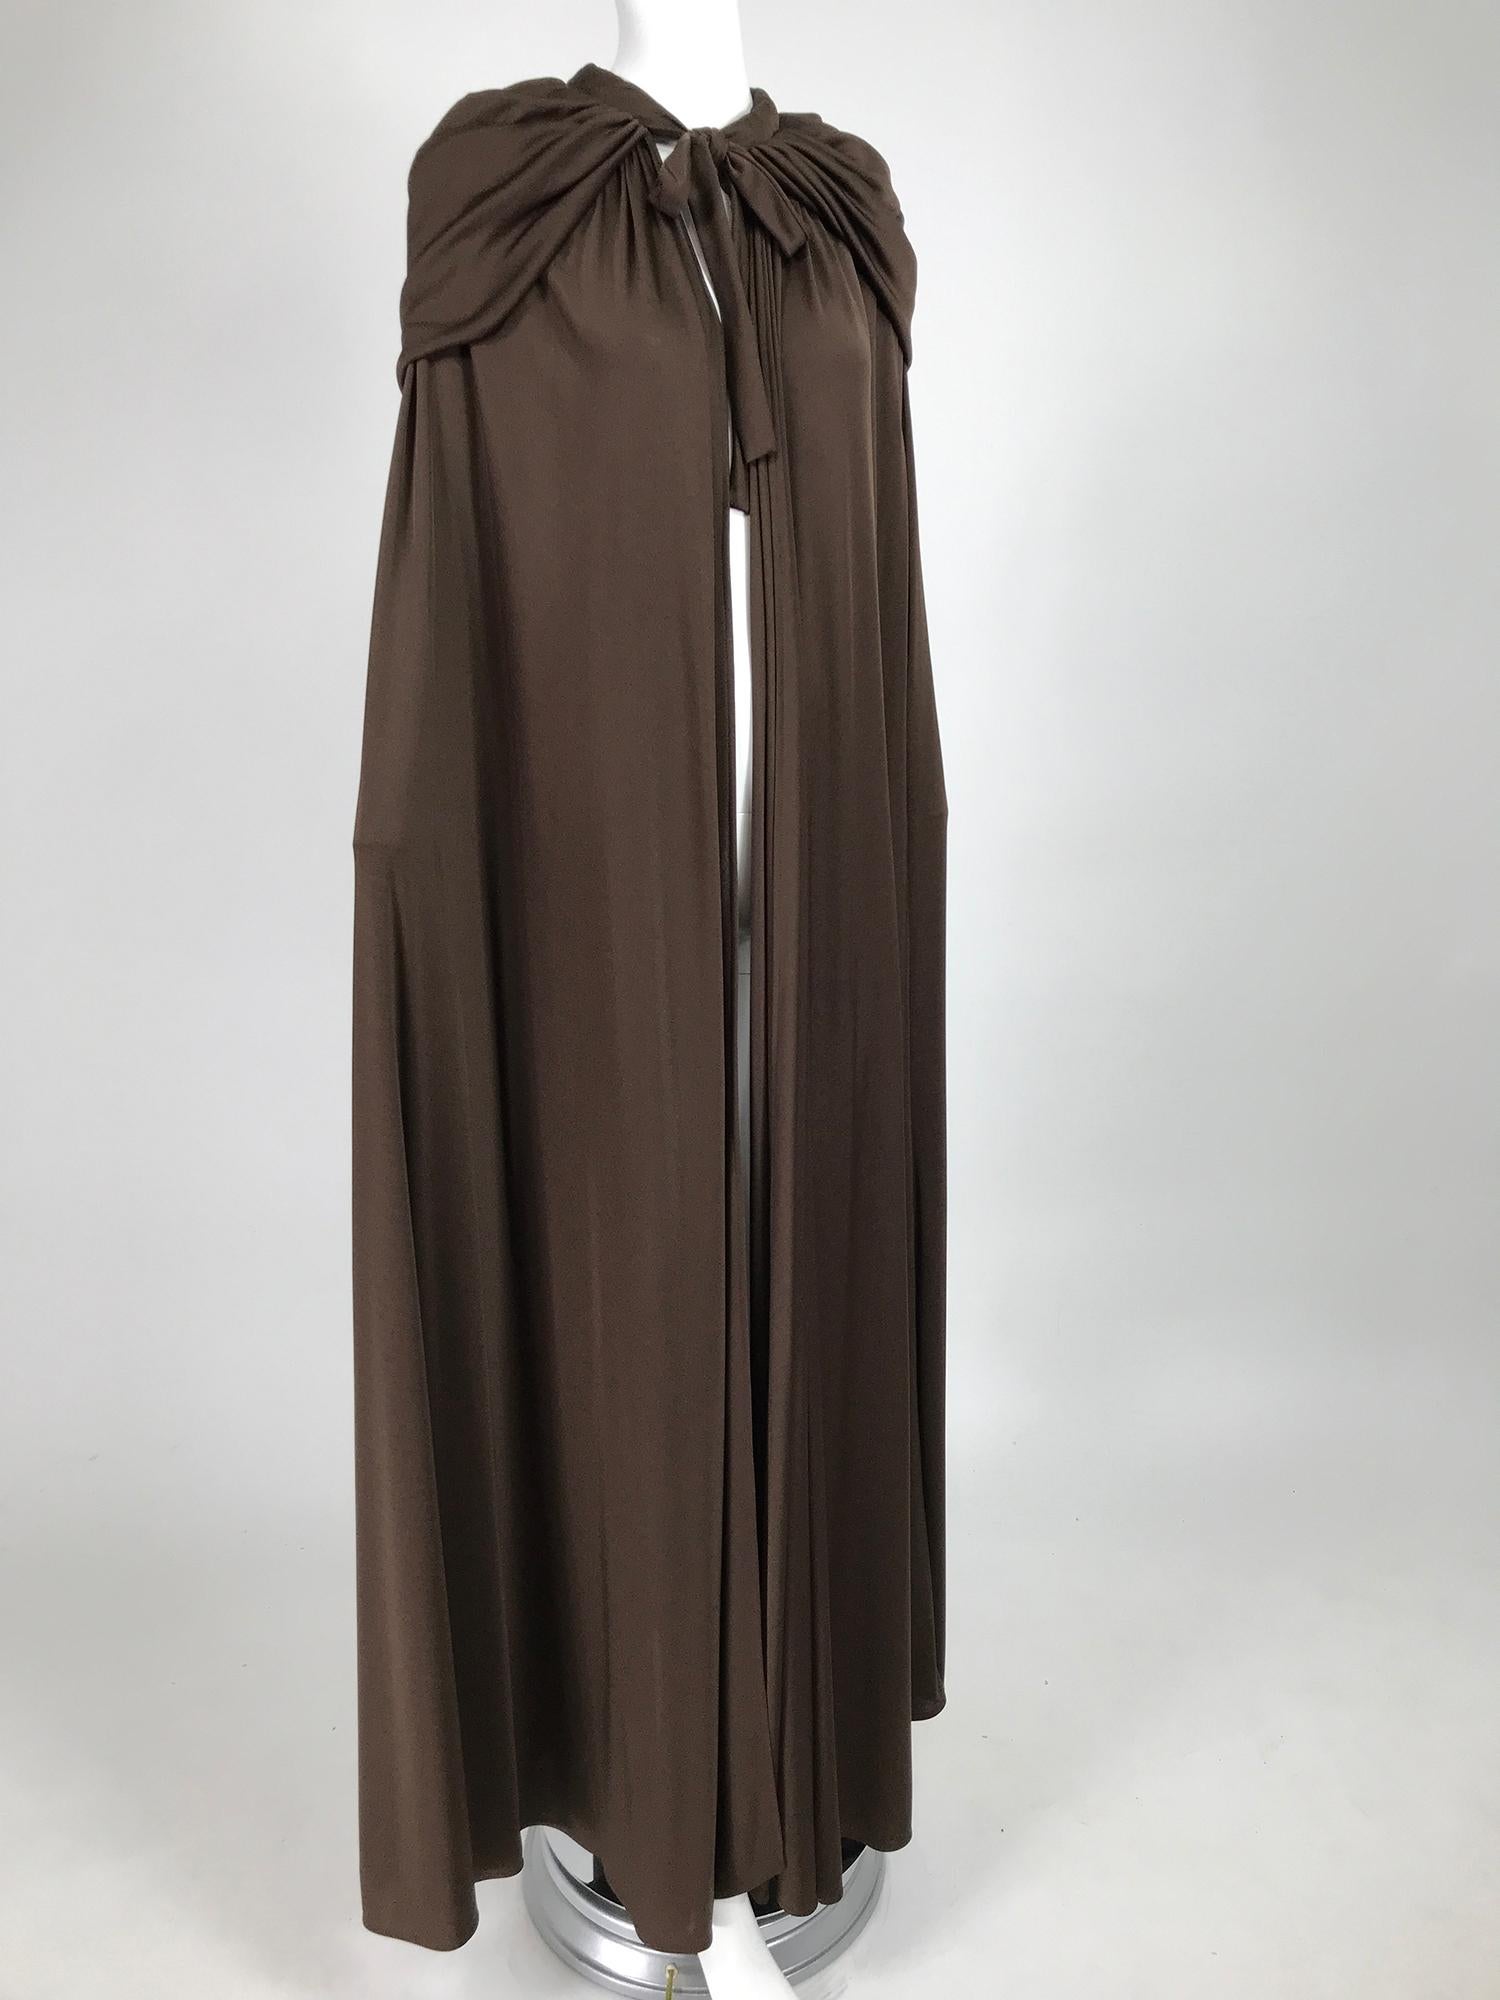 Loris Azzaro Couture Chocolate Brown Silky Jersey Full Length Hooded Cape 1970s For Sale 2